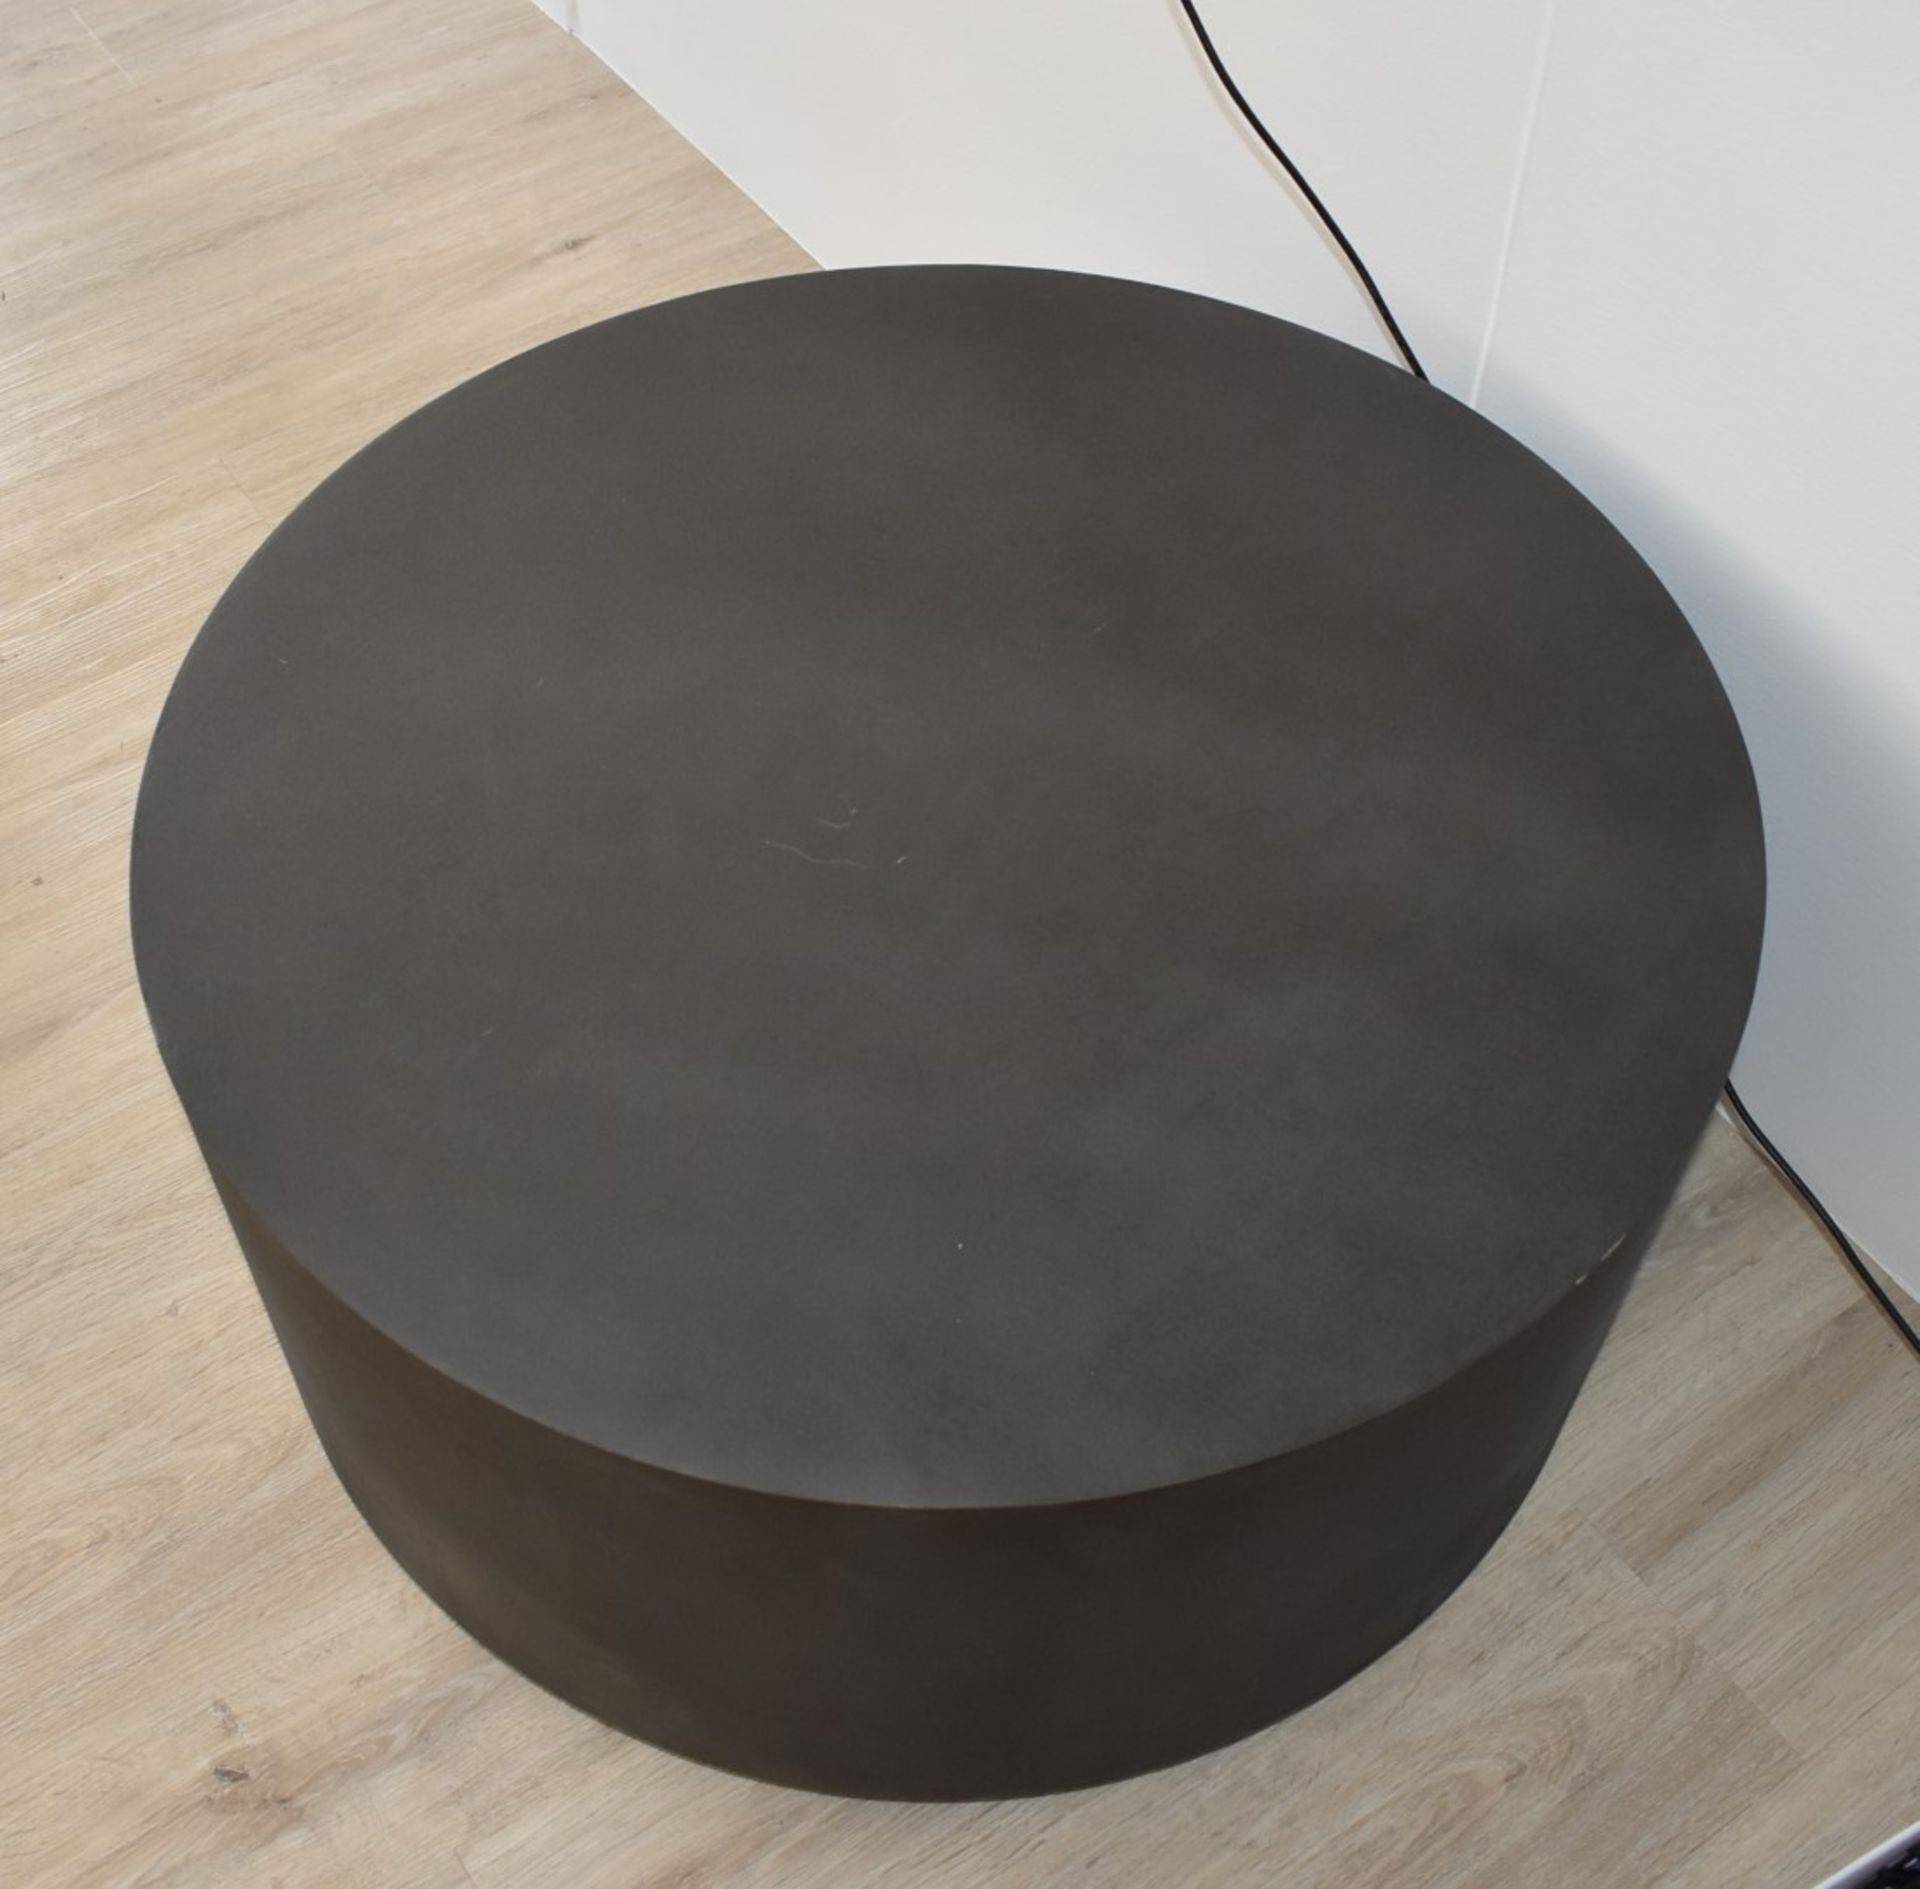 1 x Round Coffee Table With Concrete Effect Finish and Gold Base - RRP £455 - NO VAT ON THE HAMMER! - Image 3 of 7